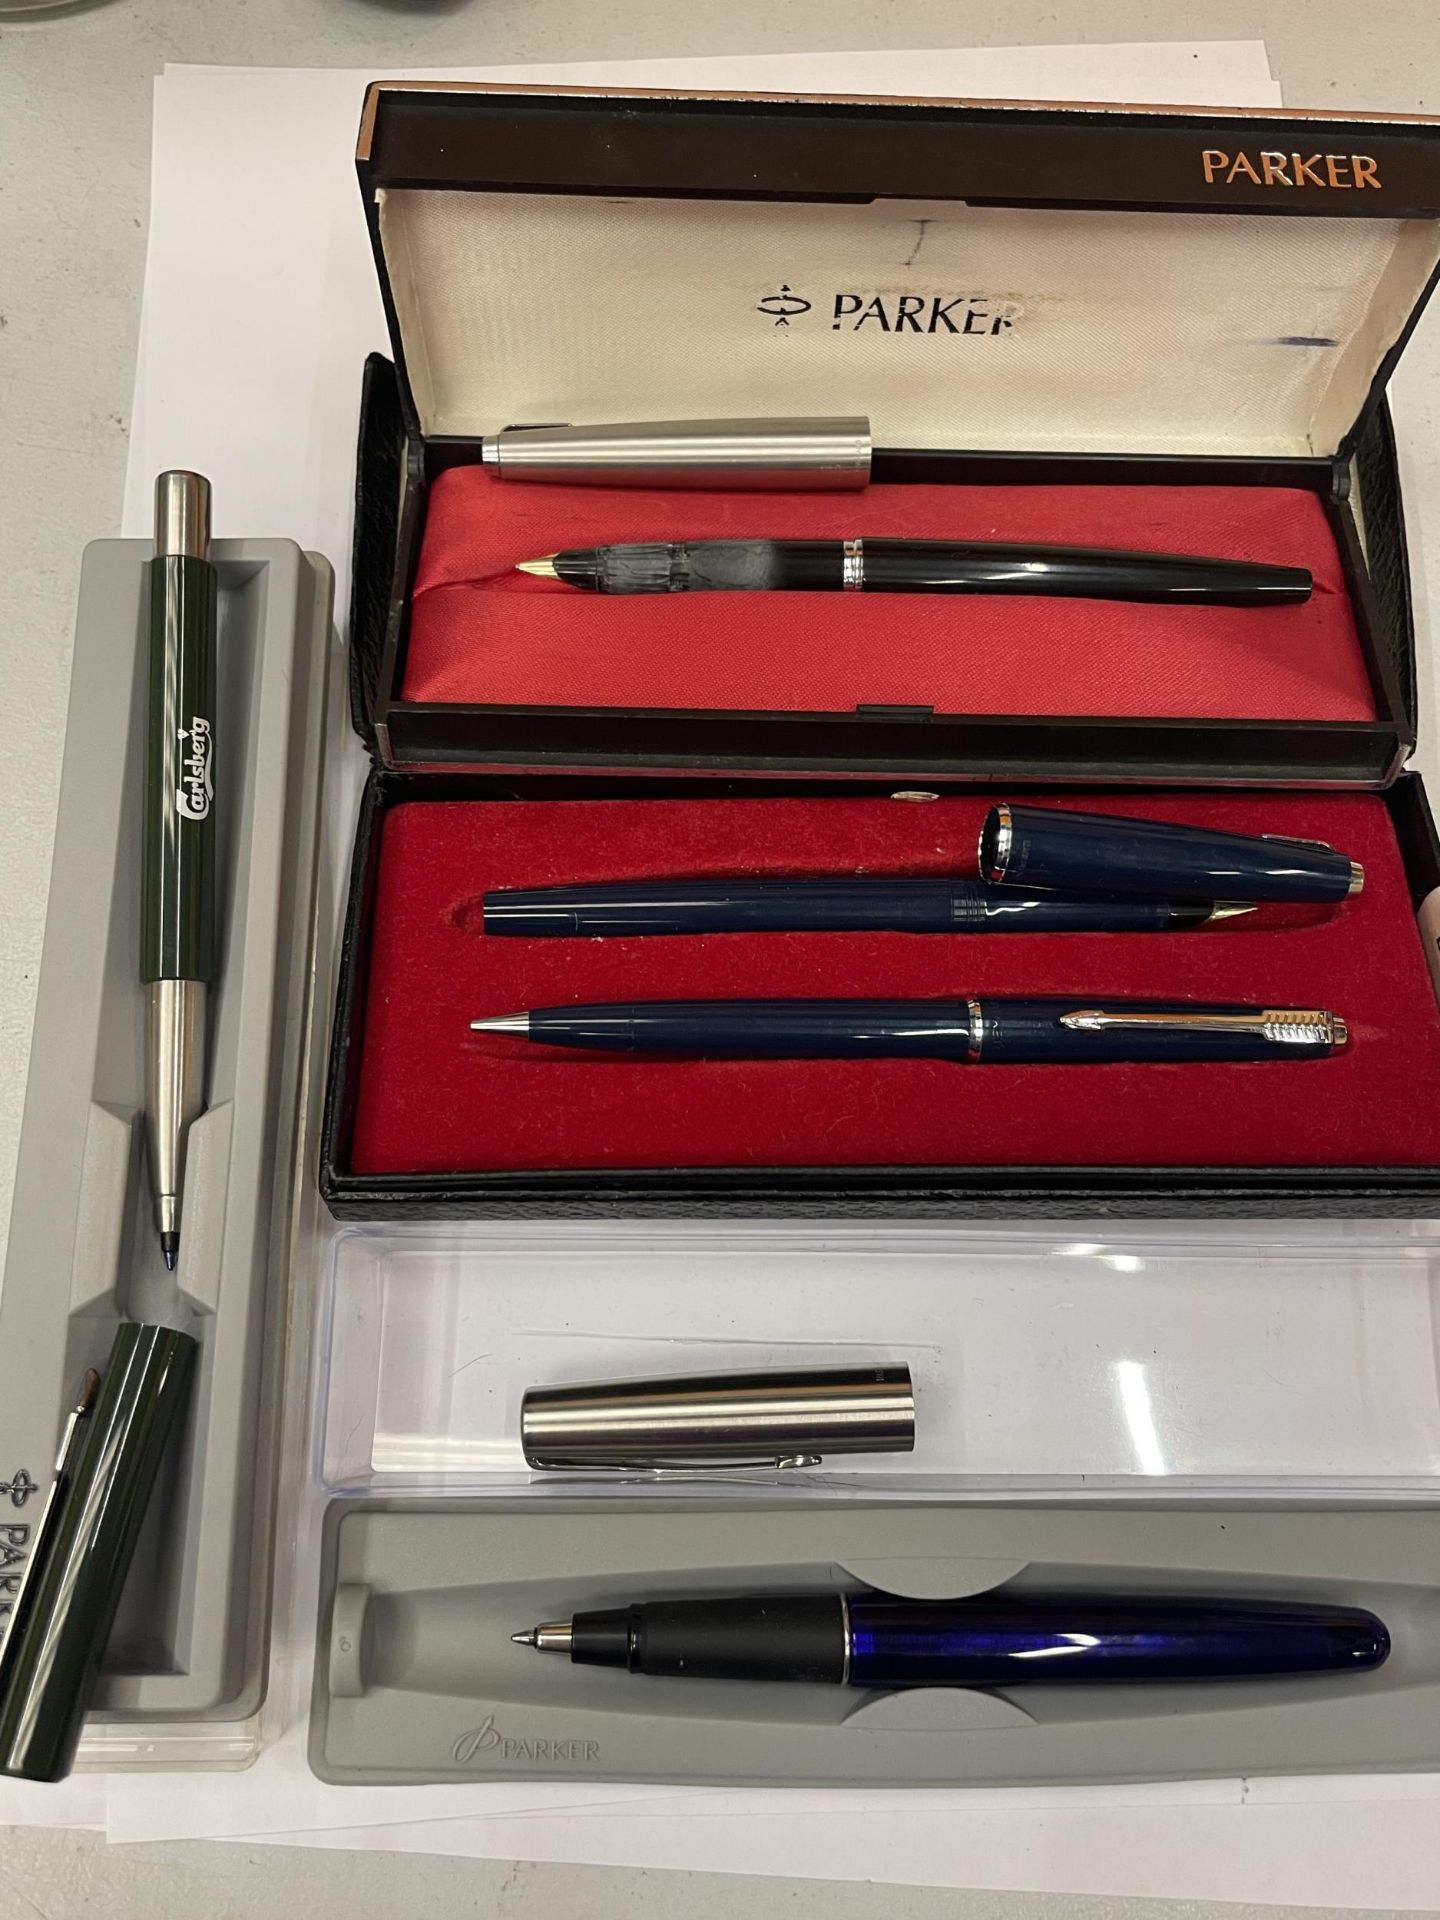 FIVE BOXED PARKER PENS TO INCLUDE FOUNTAIN, BALLPOINT, ROLLER BALL ETC - Image 5 of 5